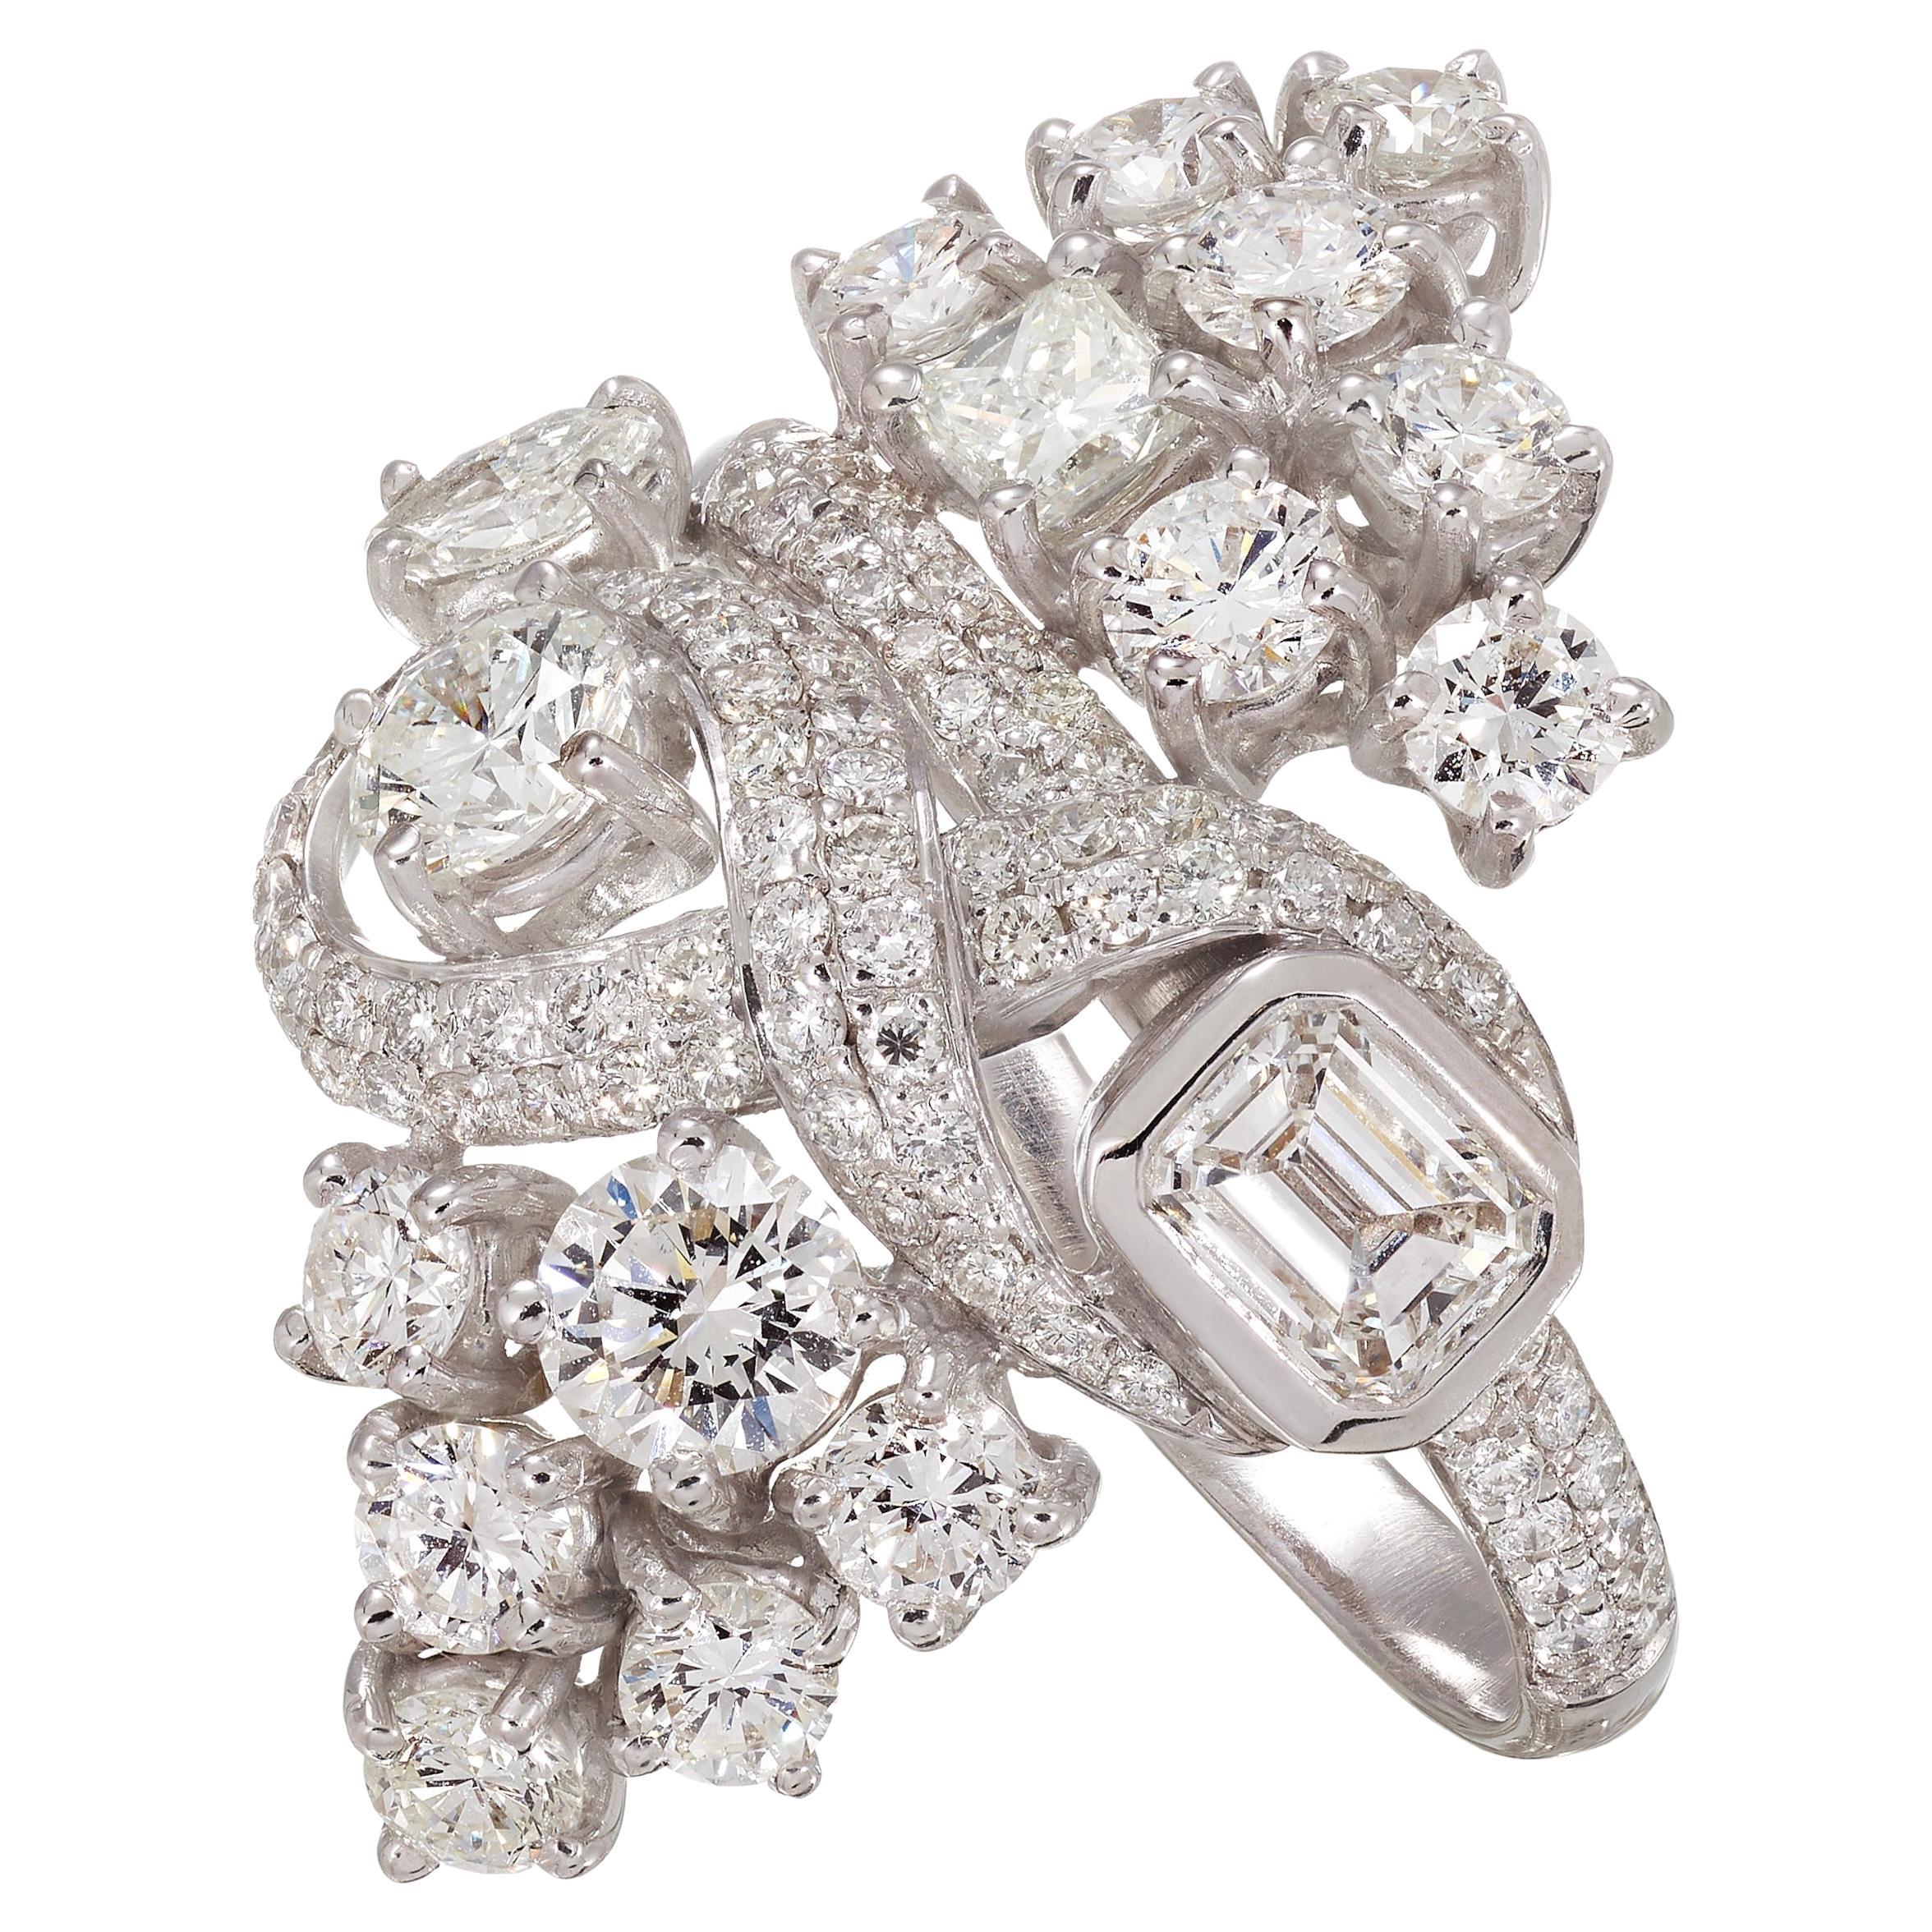 Rosior one-off Diamond Cocktail Ring set in Platinum and White Gold For Sale